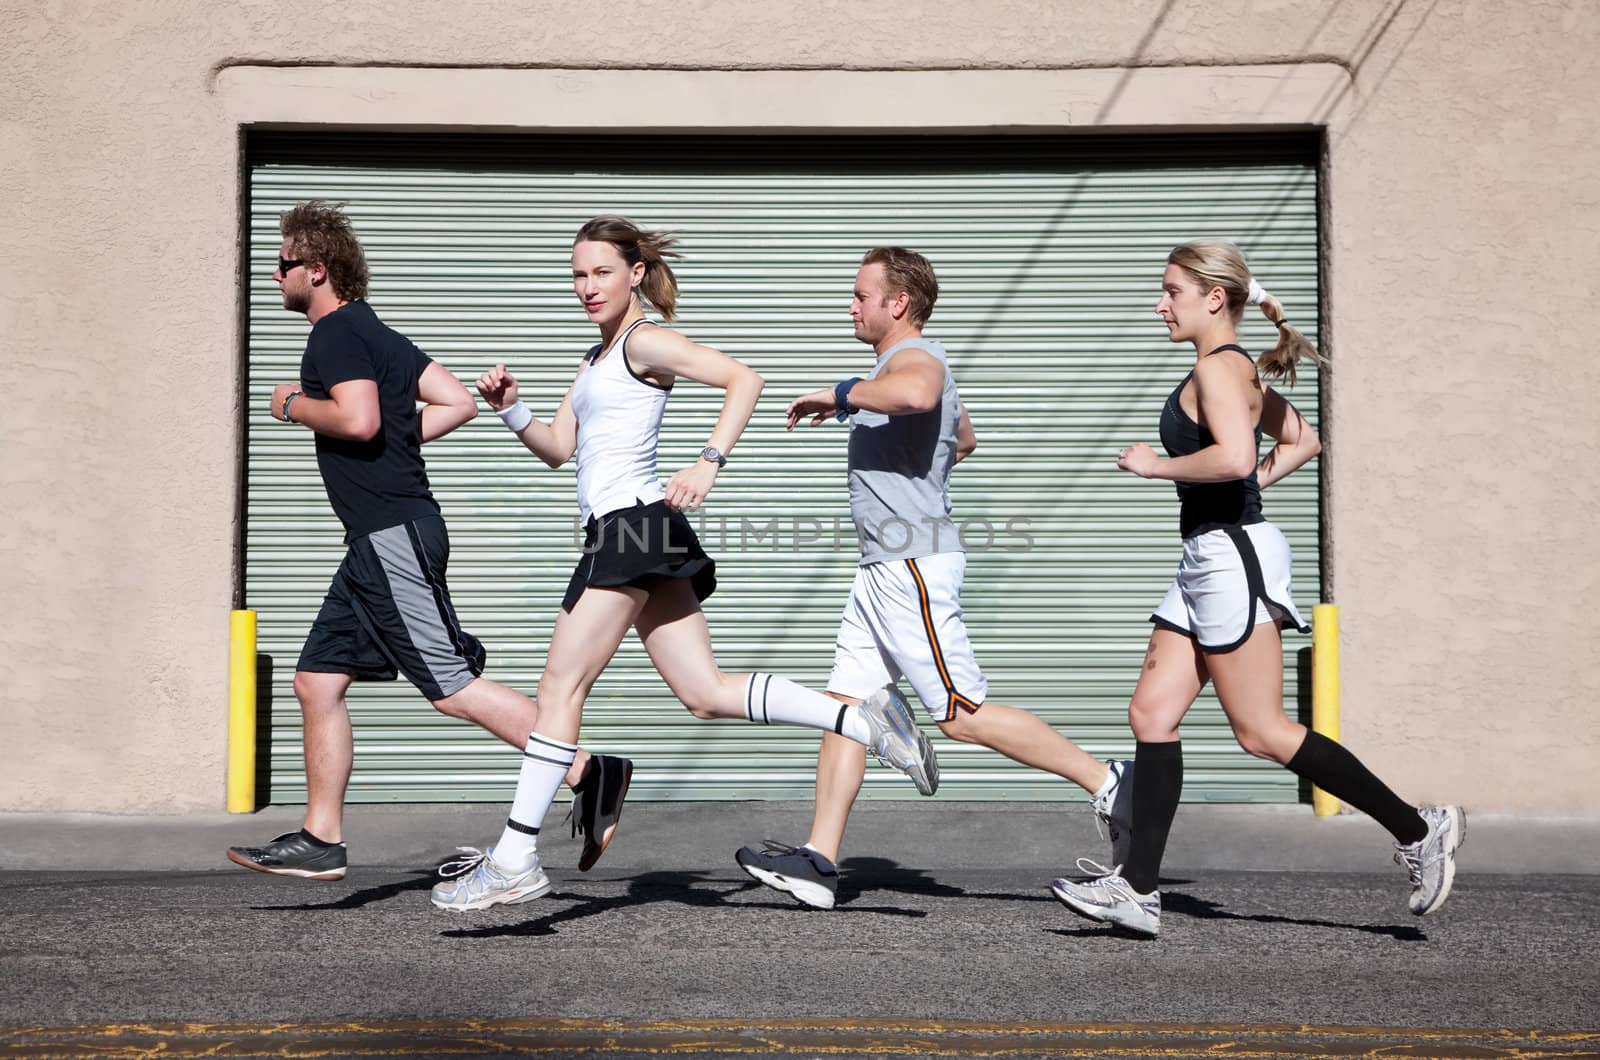 Foursome runs in the city for exercise. by Creatista